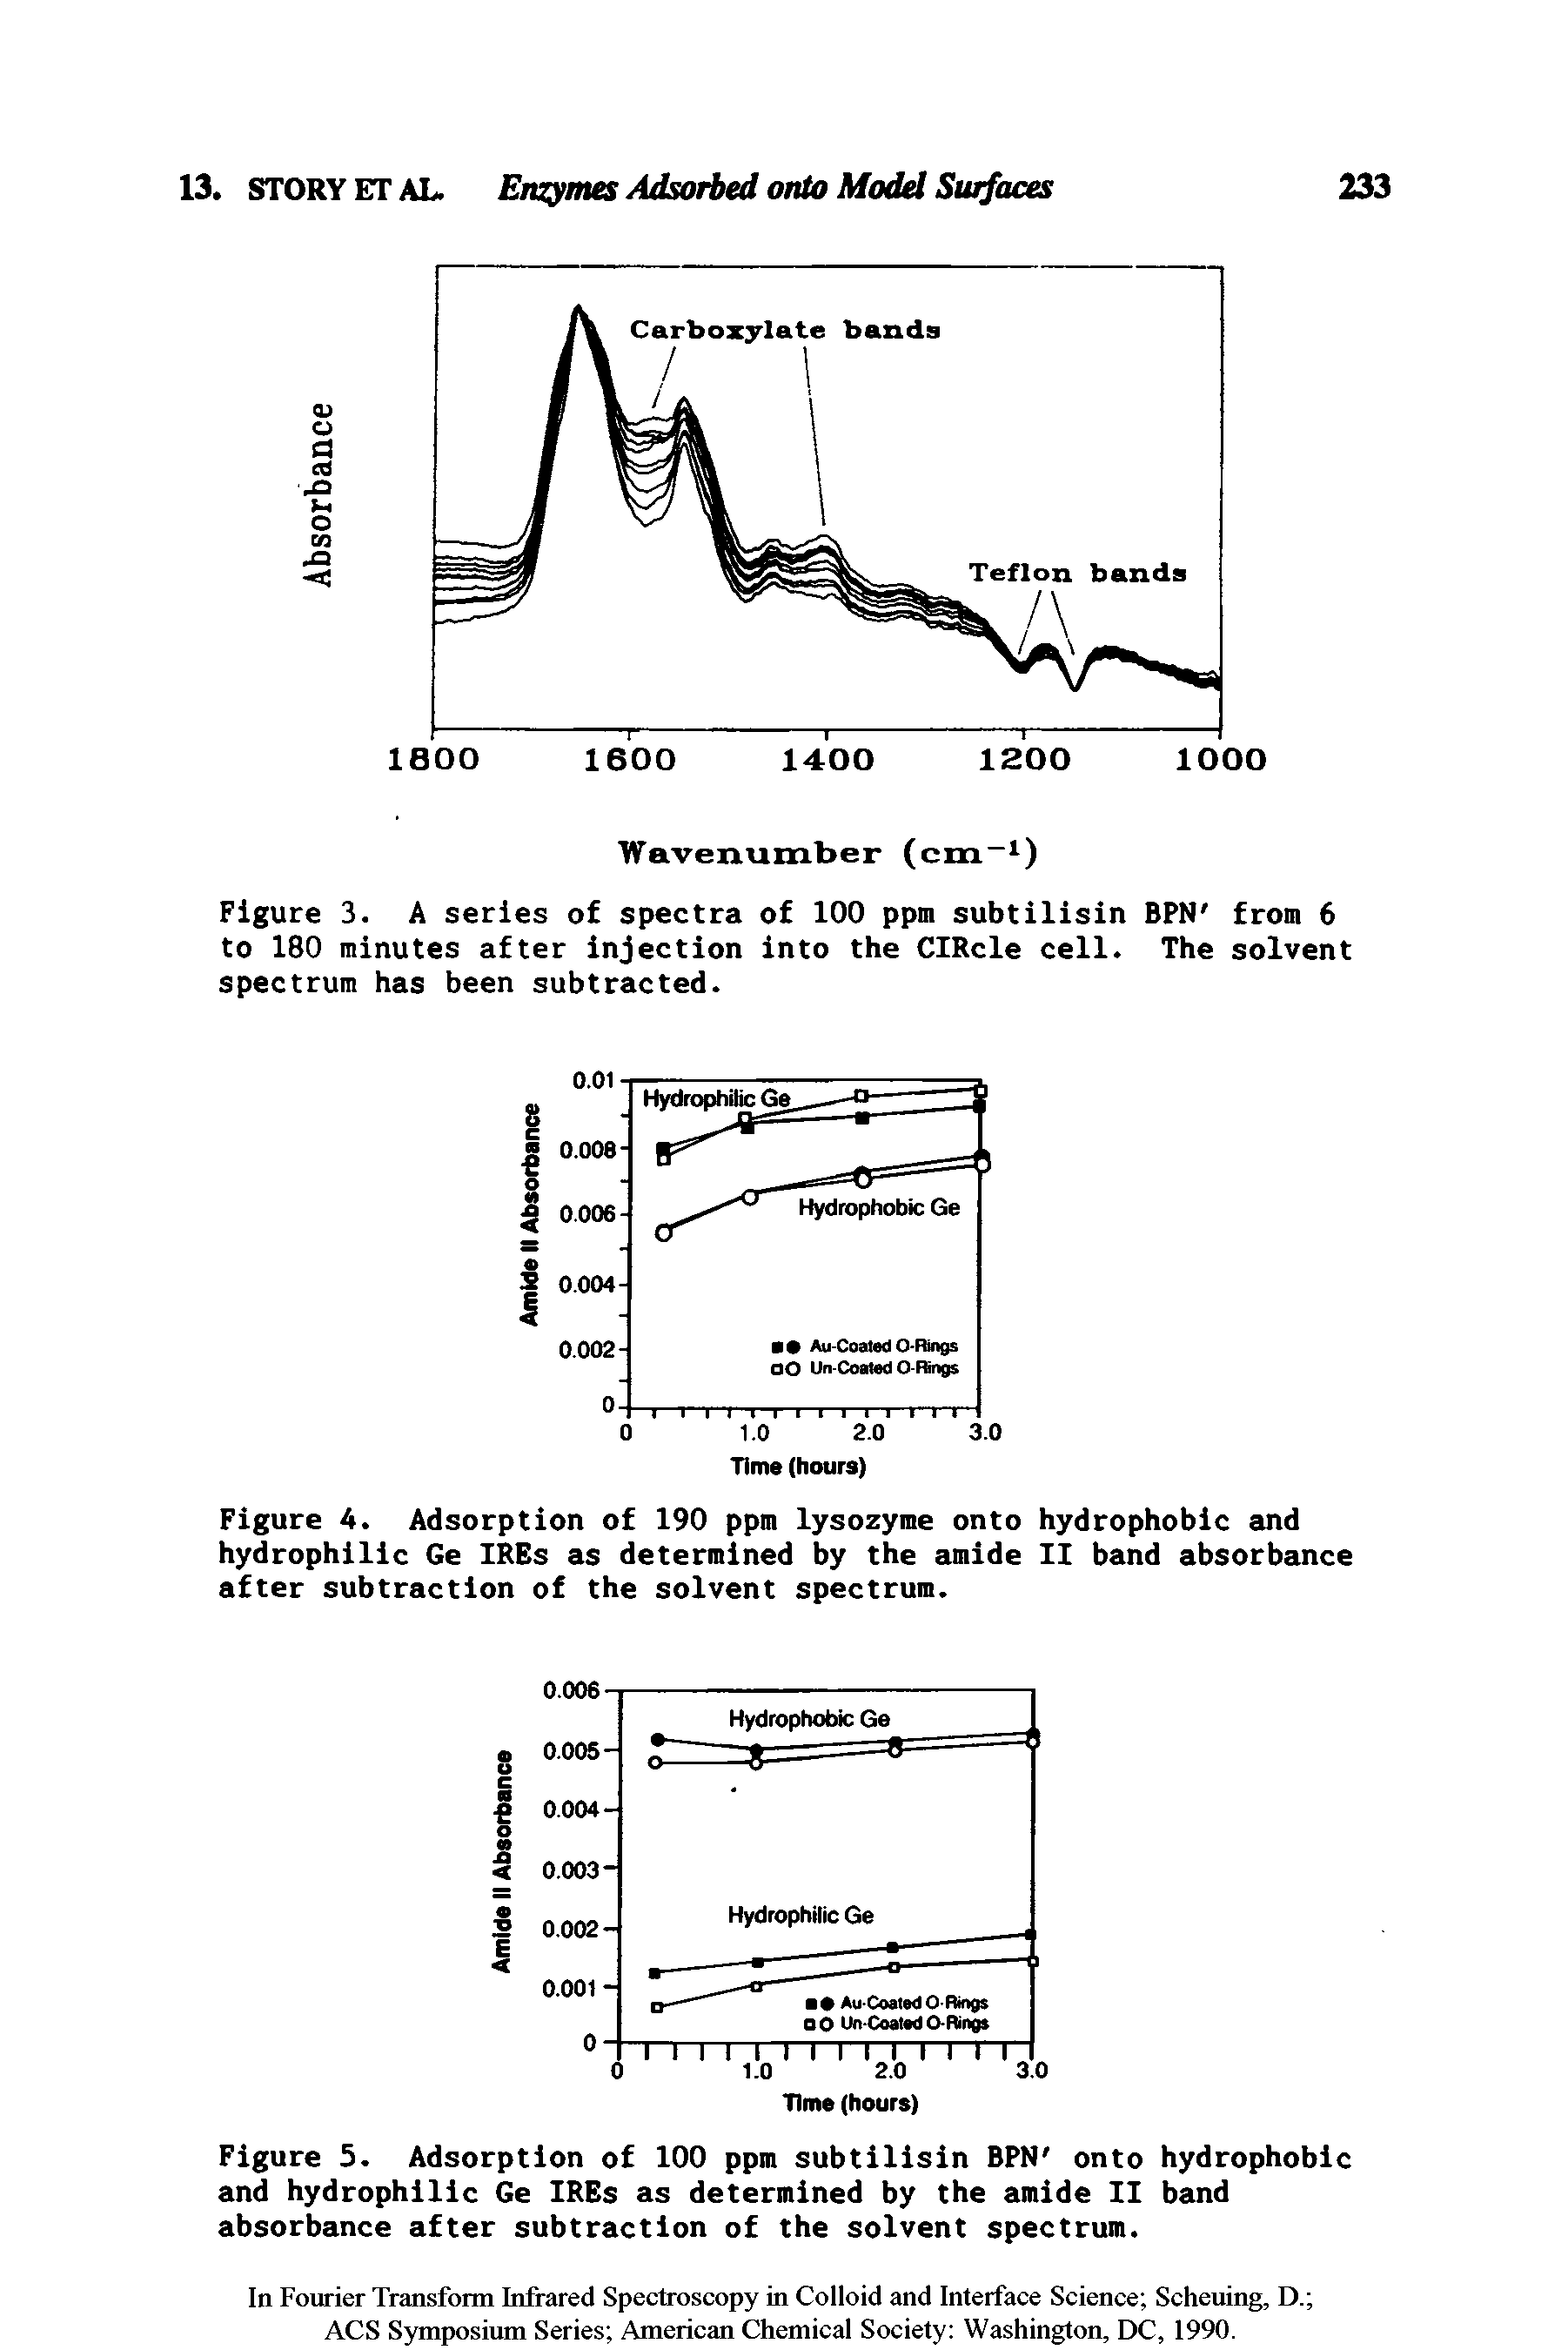 Figure 3. A series of spectra of 100 ppm subtilisin BPN from 6 to 180 minutes after injection into the CIRcle cell. The solvent spectrum has been subtracted.